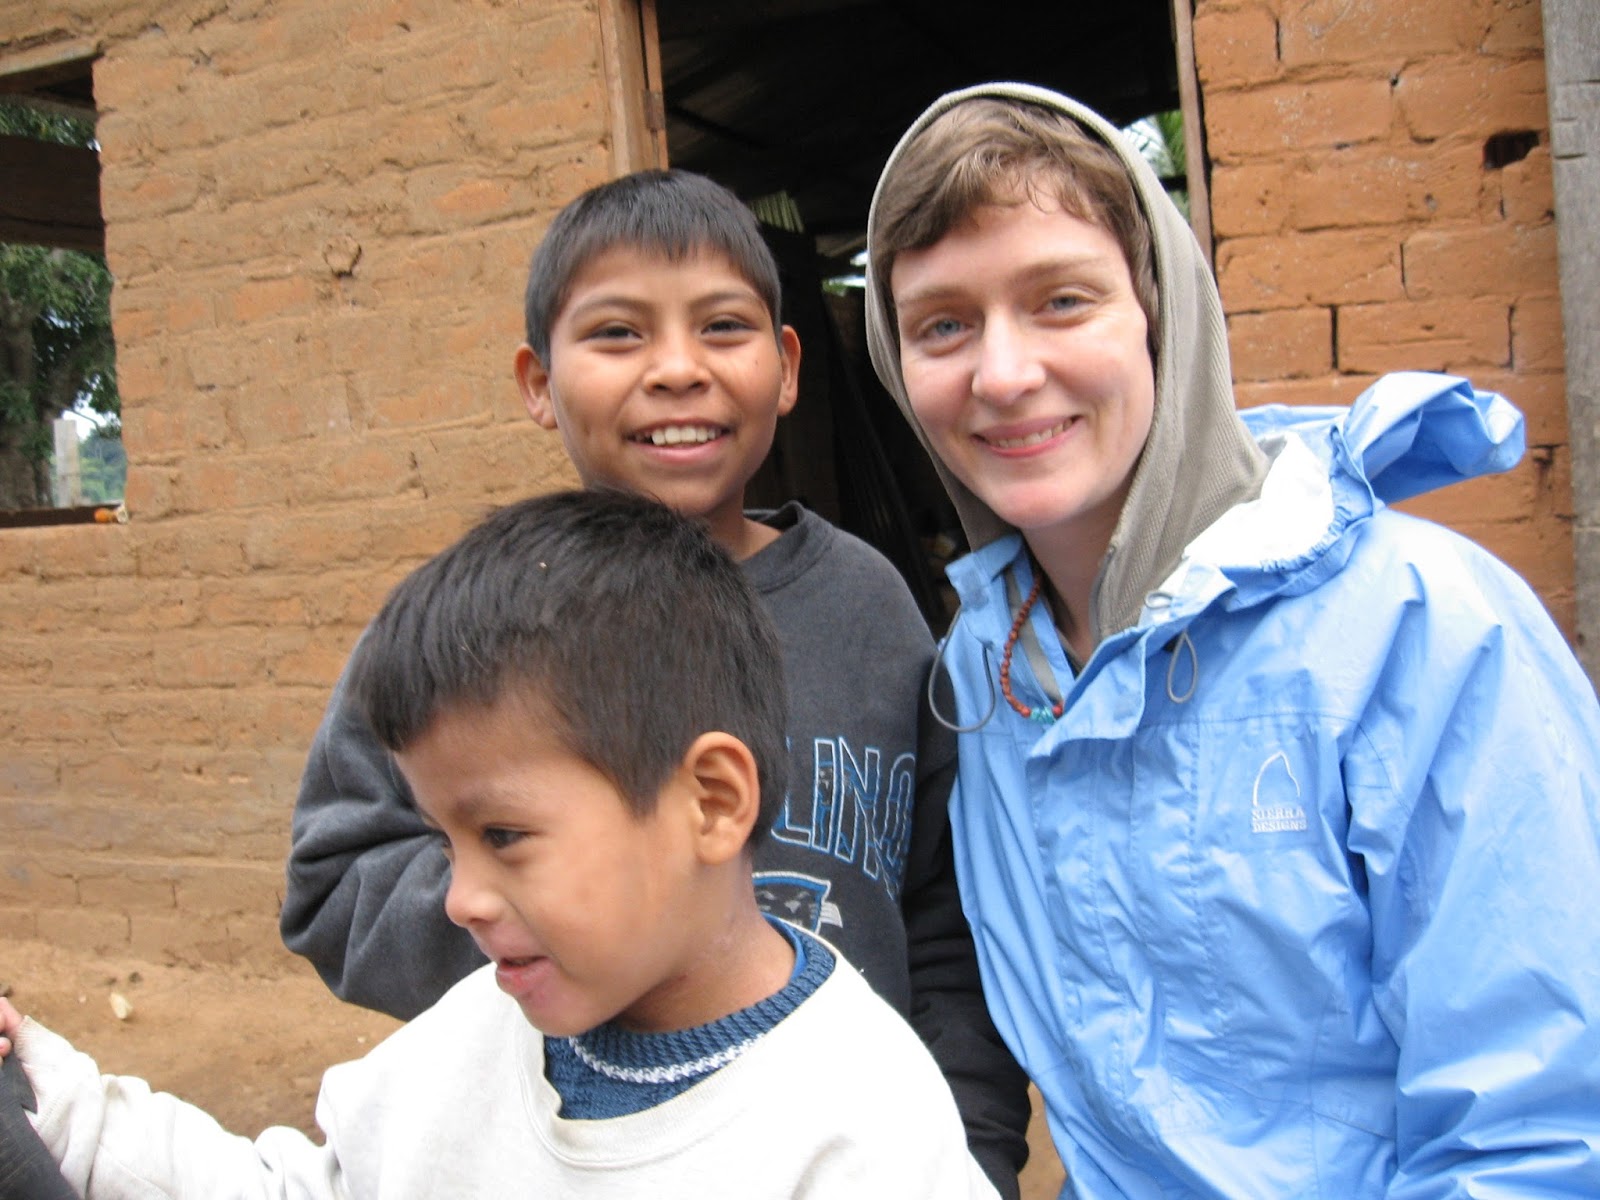 Science and the Community - Adventures in the Bolivian Amazon: July 2013